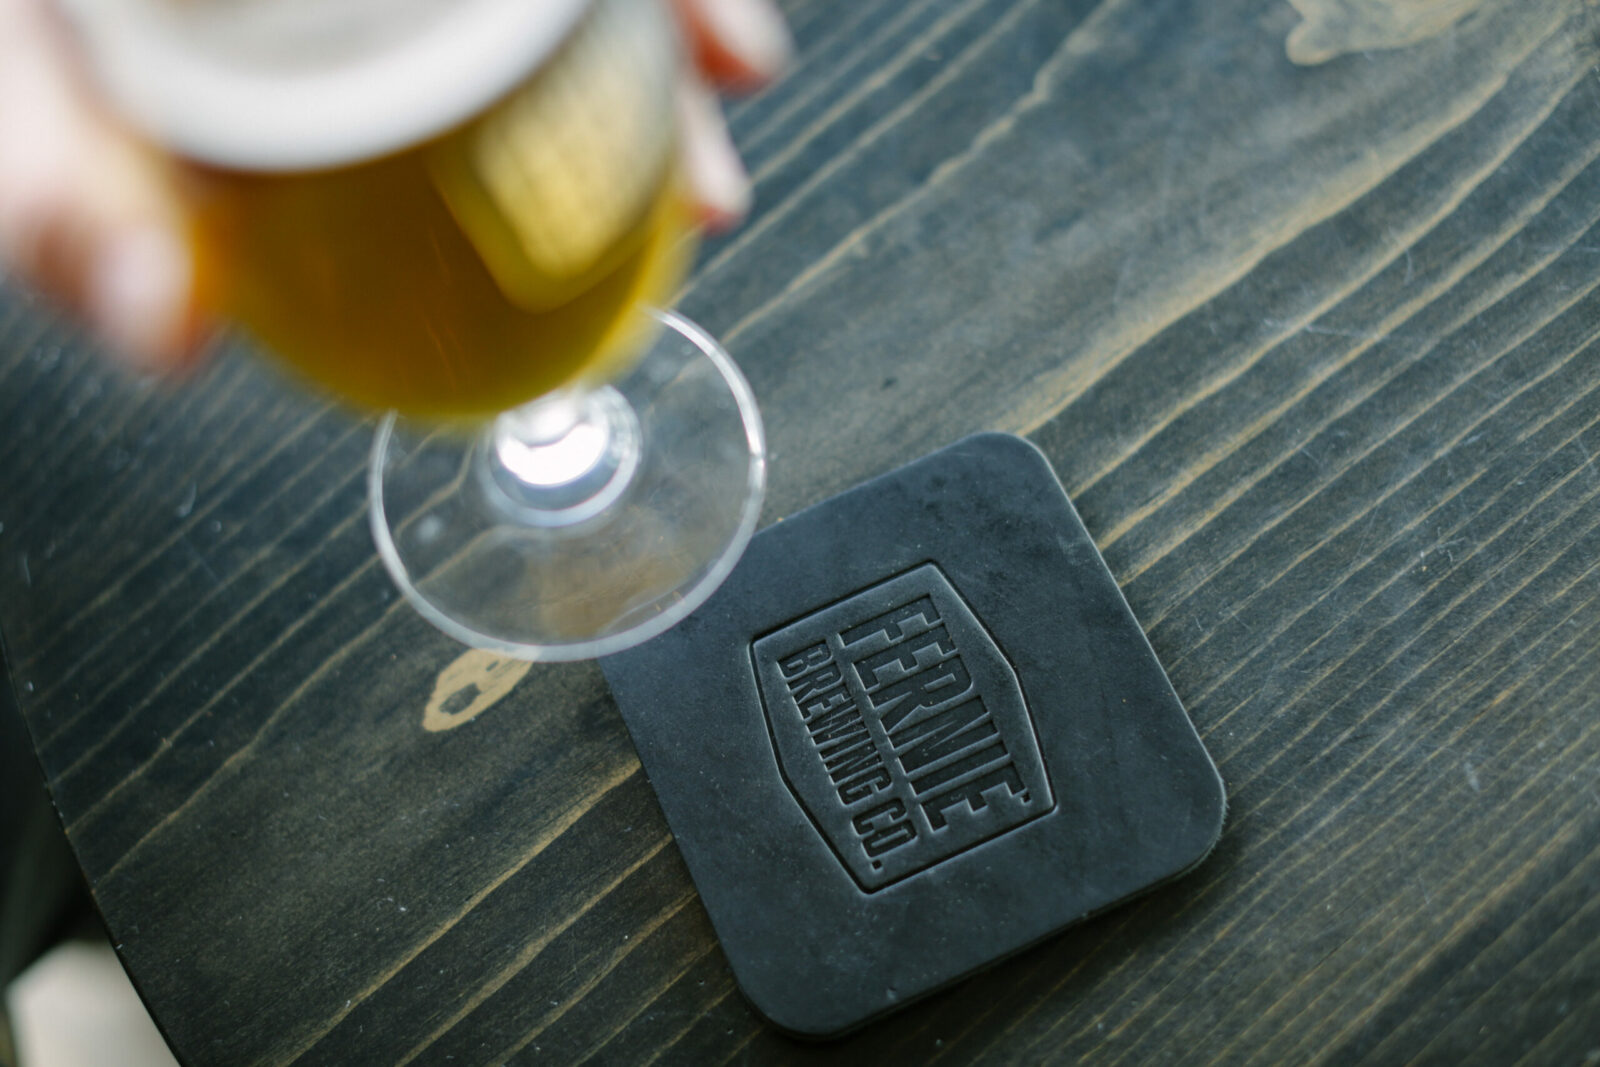 Glass of beer being lifted off of a Fernie Brewing Co. black leather coaster.